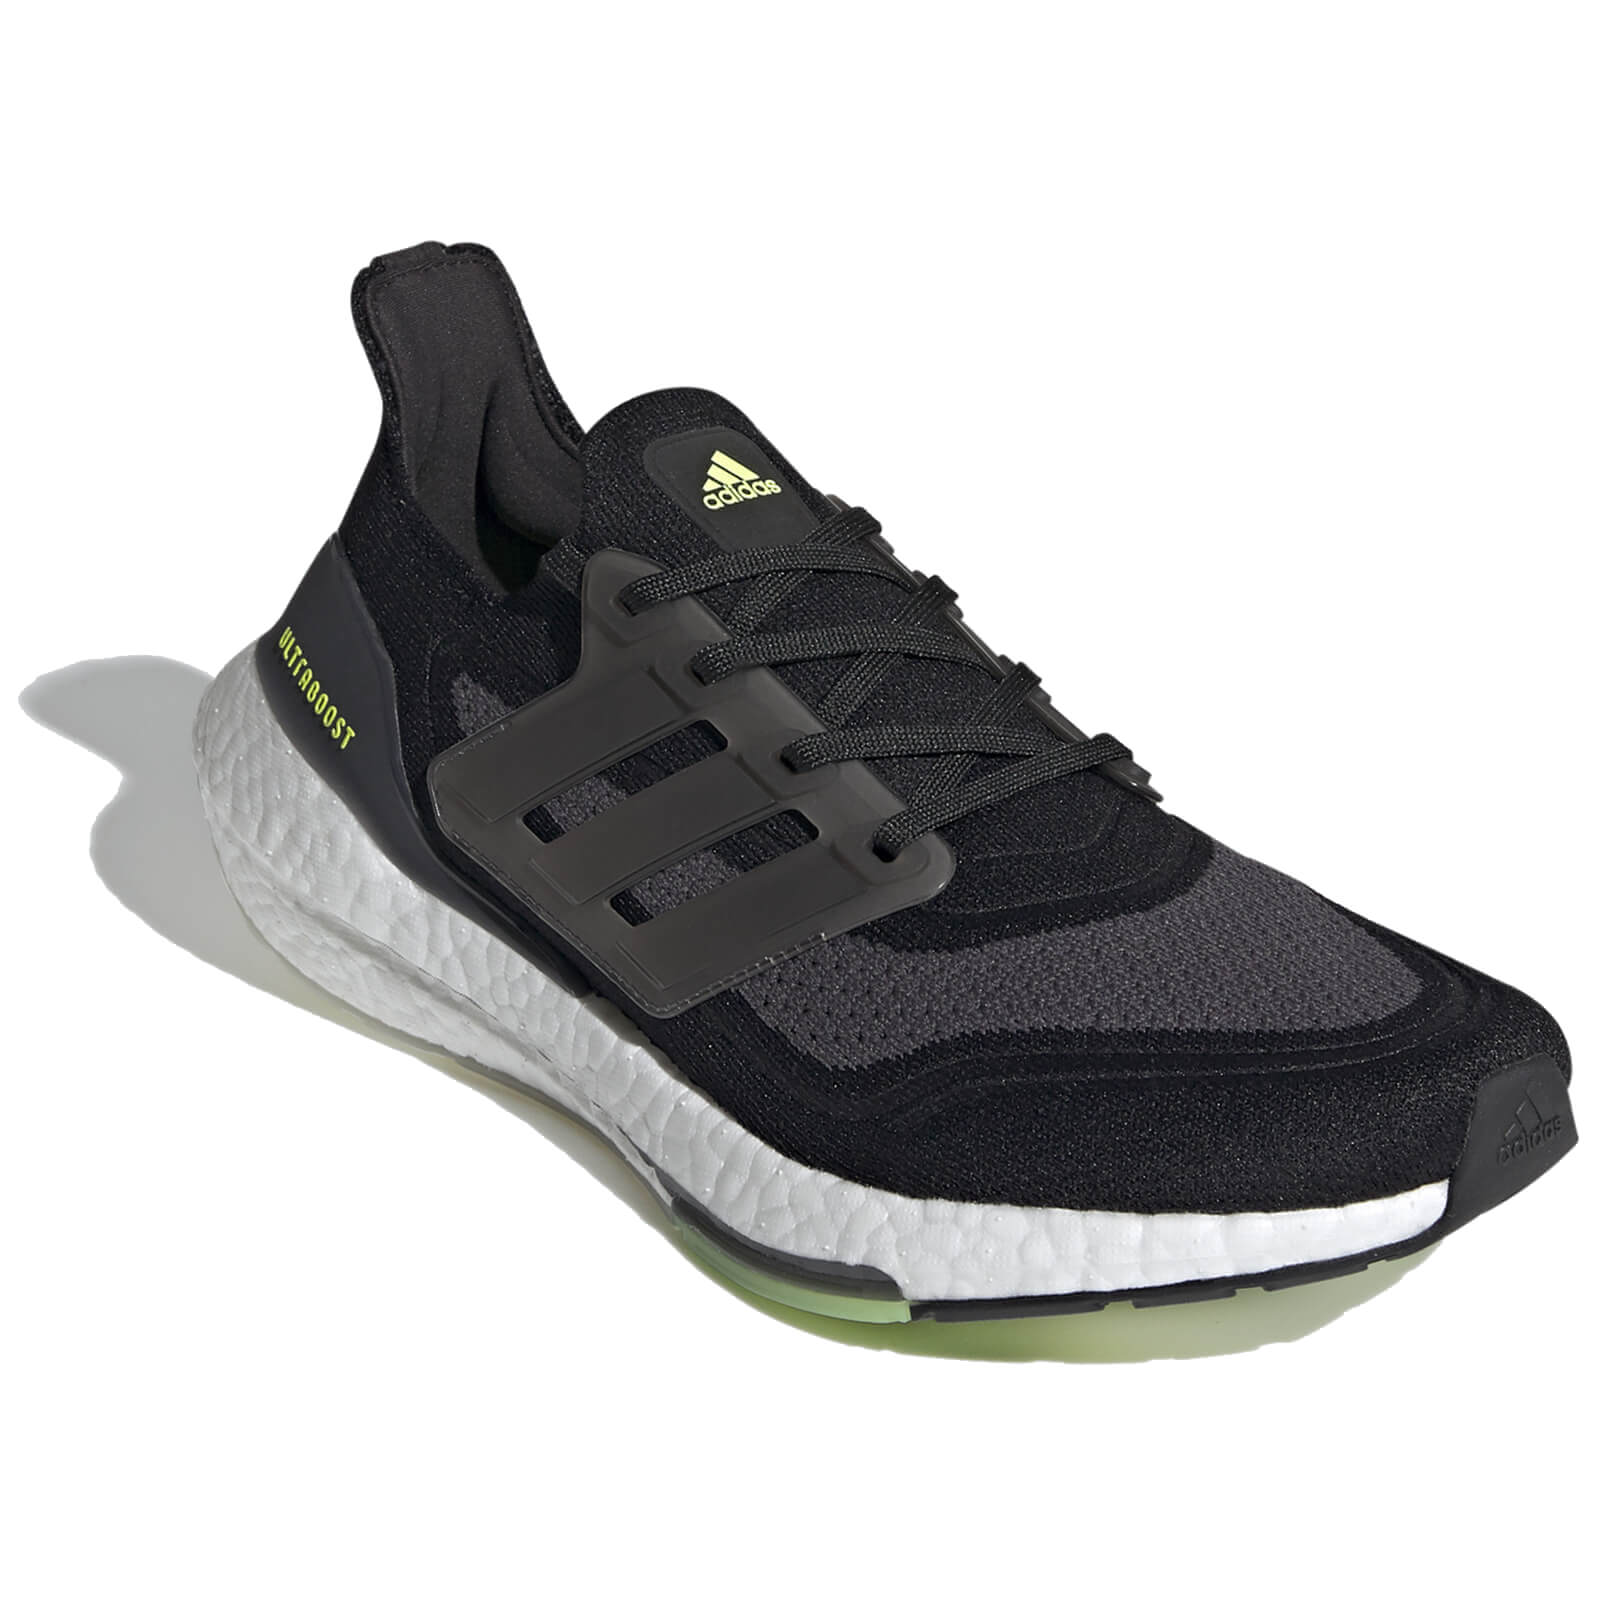 Adidas Ultra Boost 21 Running Shoes - Core Black/Silver Met./Solar Yellow - US 7.5/UK 7